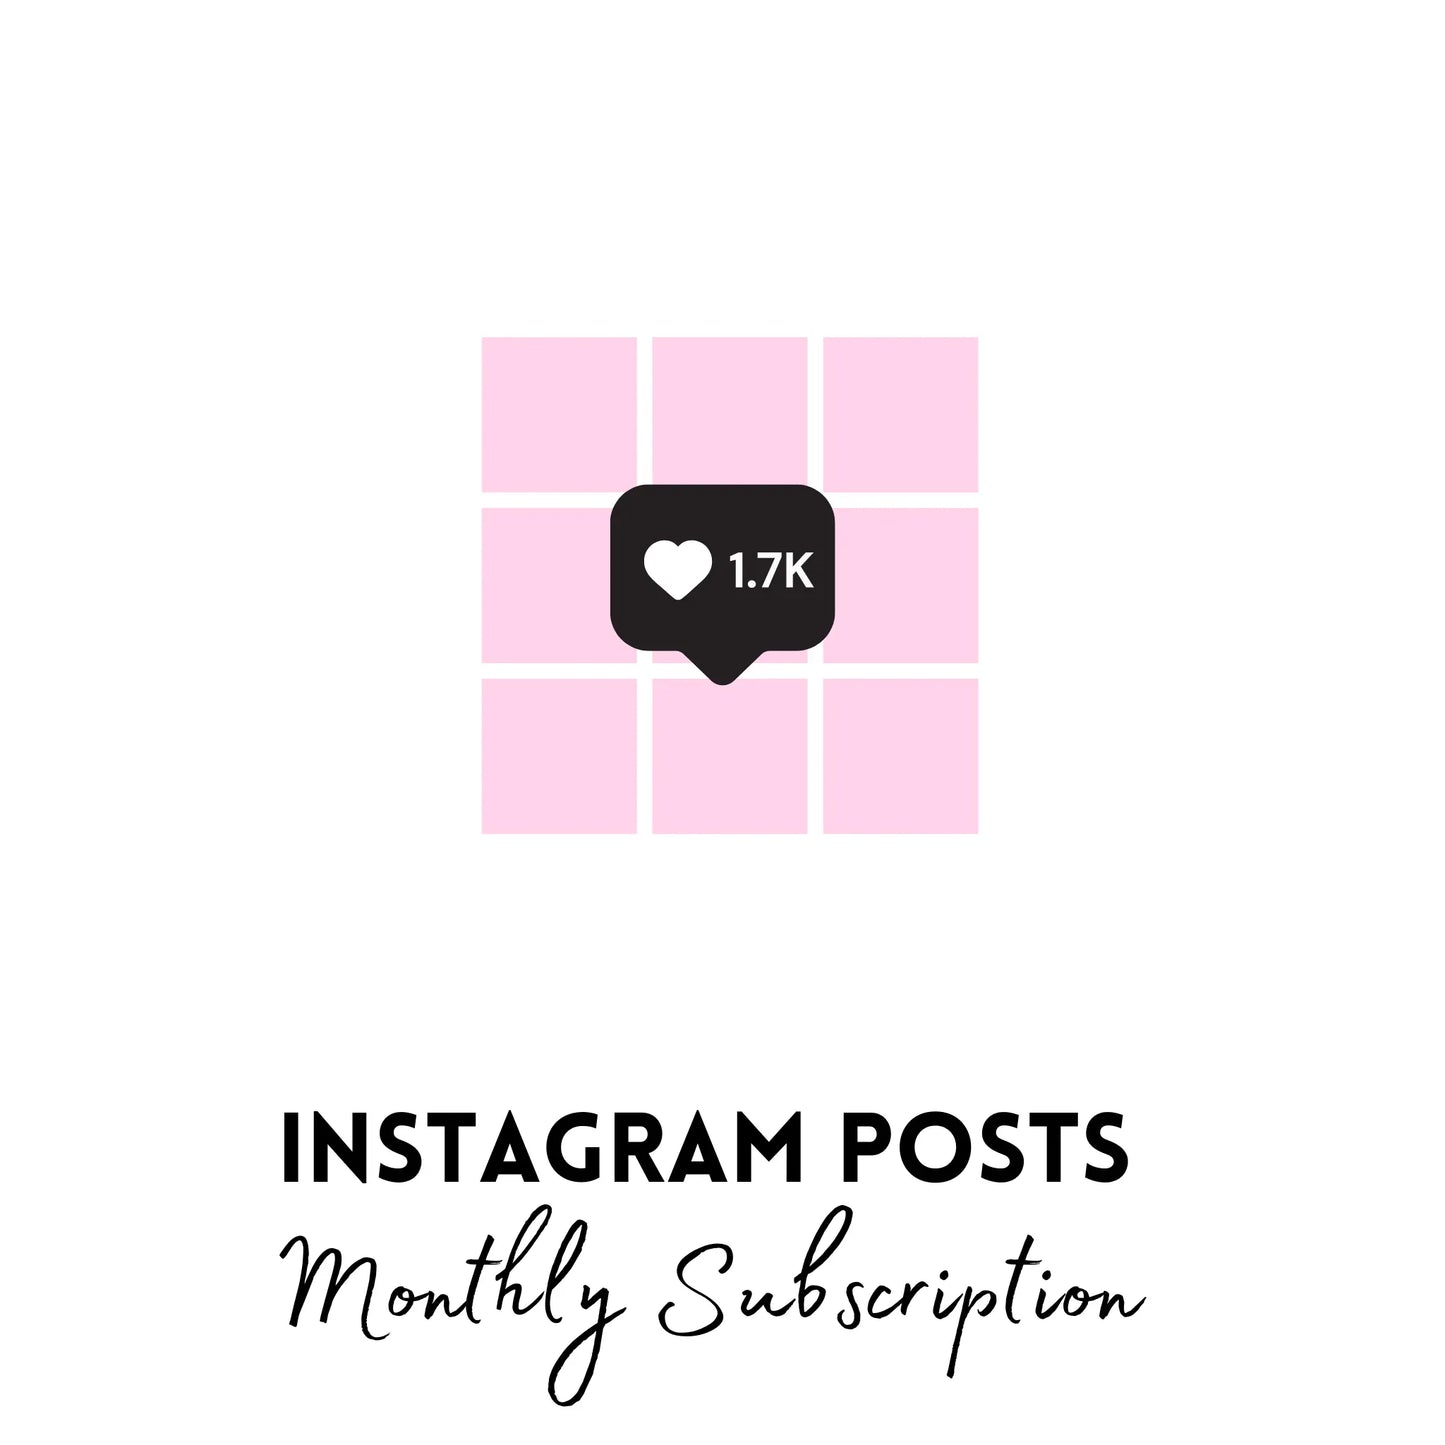 8 x Social Media Posts on a Monthly Subscription by an Instagram Manager